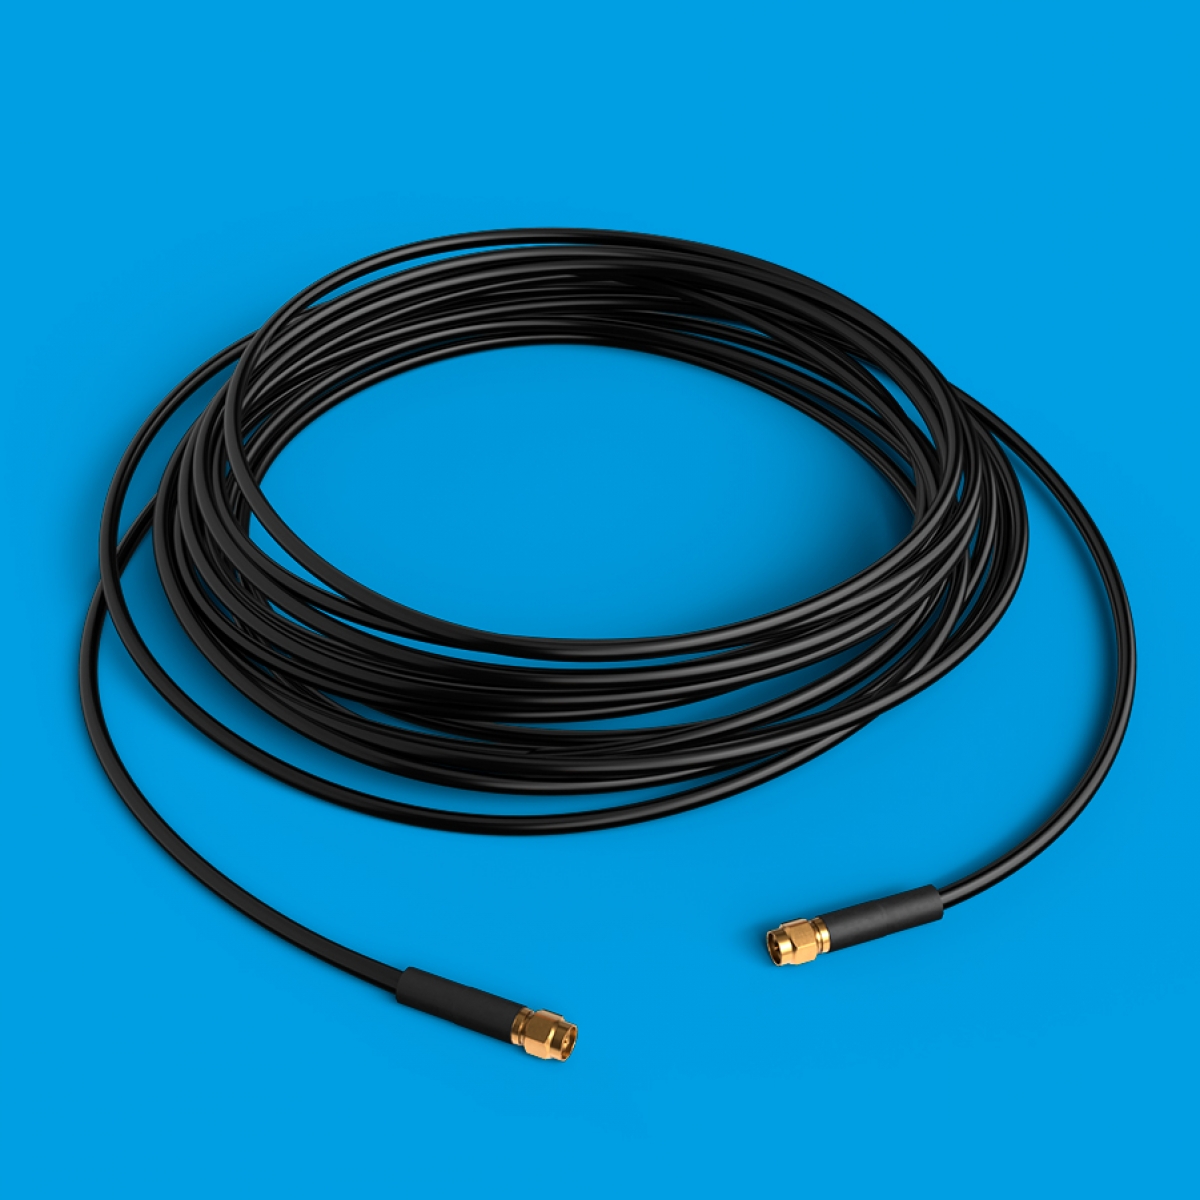 10M Antenna Extension Cable (SMA Male to SMA Male) 1